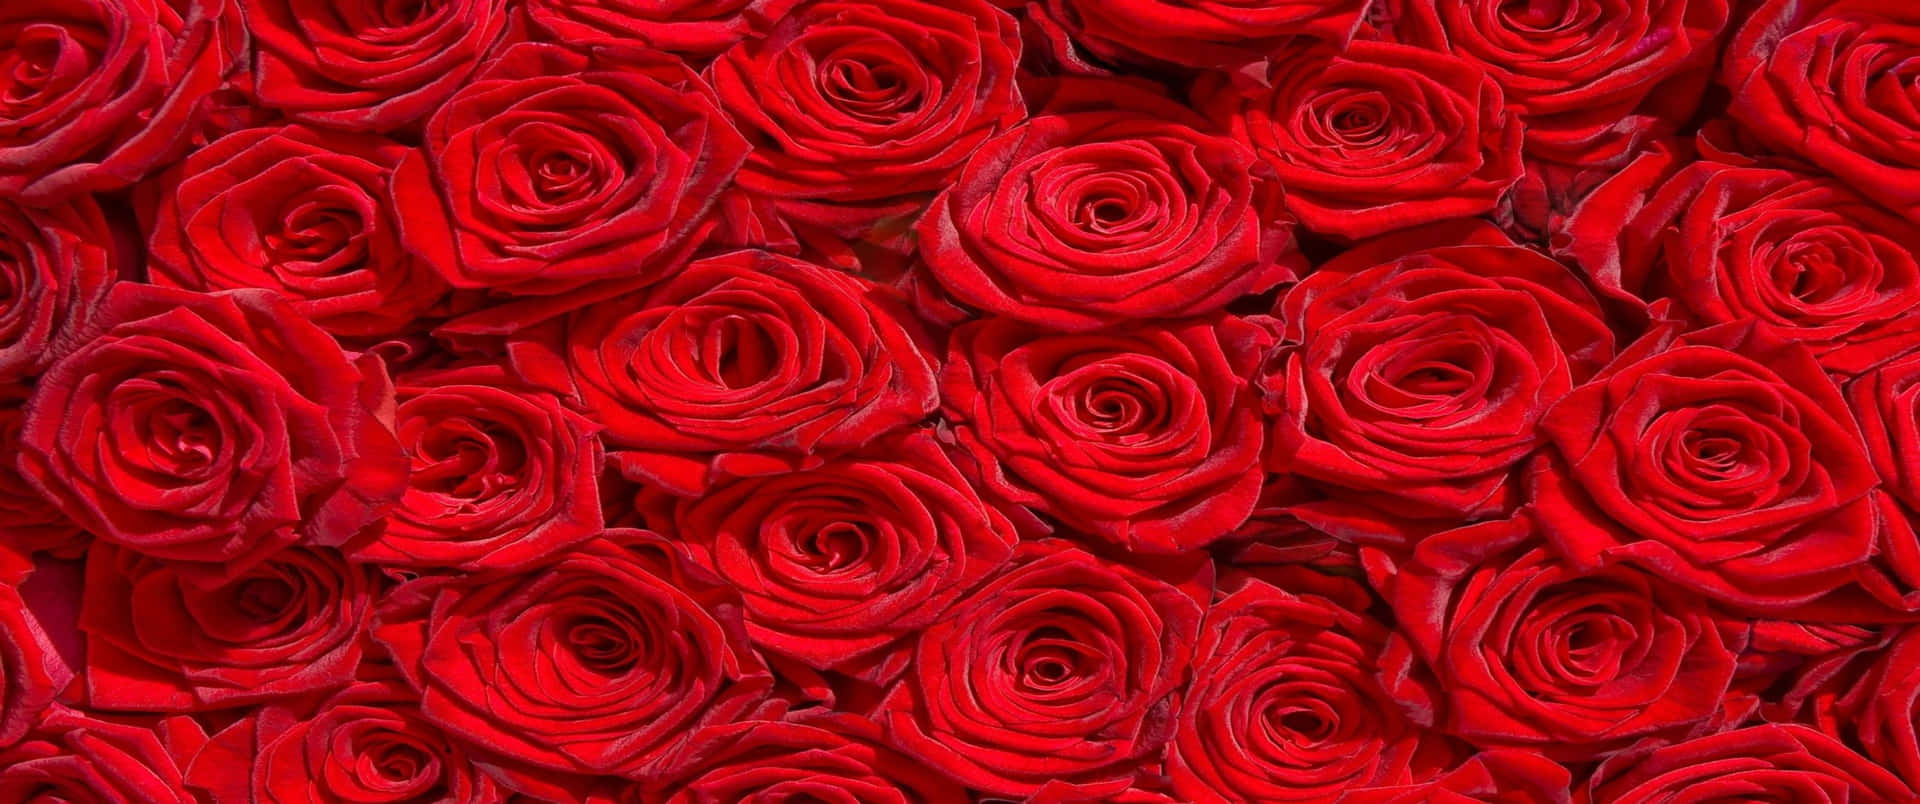 3440x1440p Roses Background Wallpaper